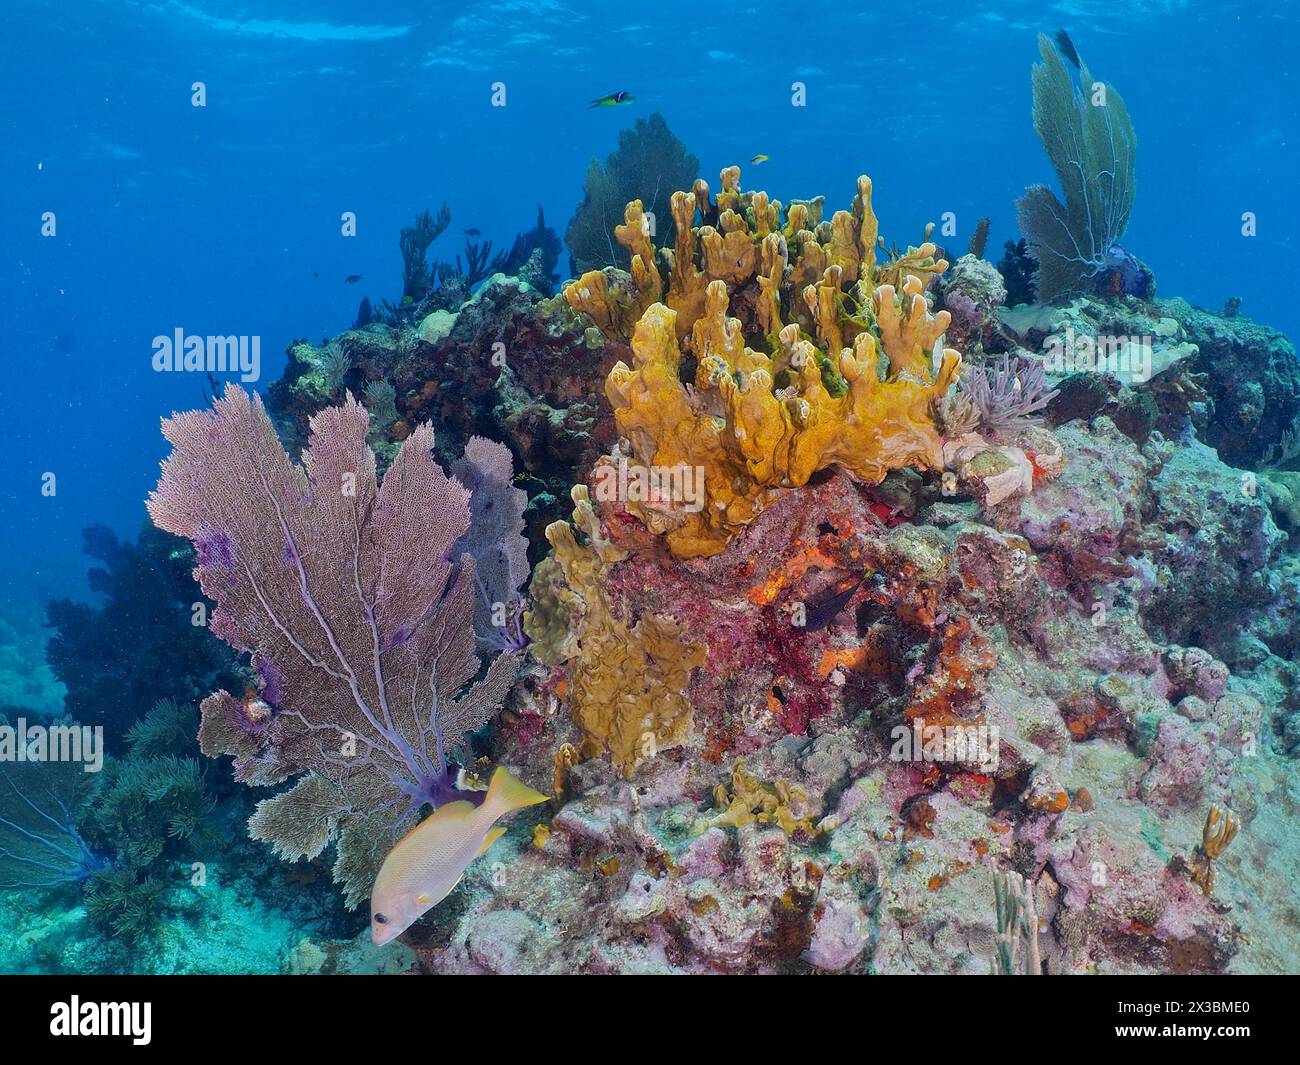 Colourful coral reef with fire coral (Millepora complanata), common sea fan (Gorgonia ventalina) and tropical fish in their natural habitat. Dive Stock Photo